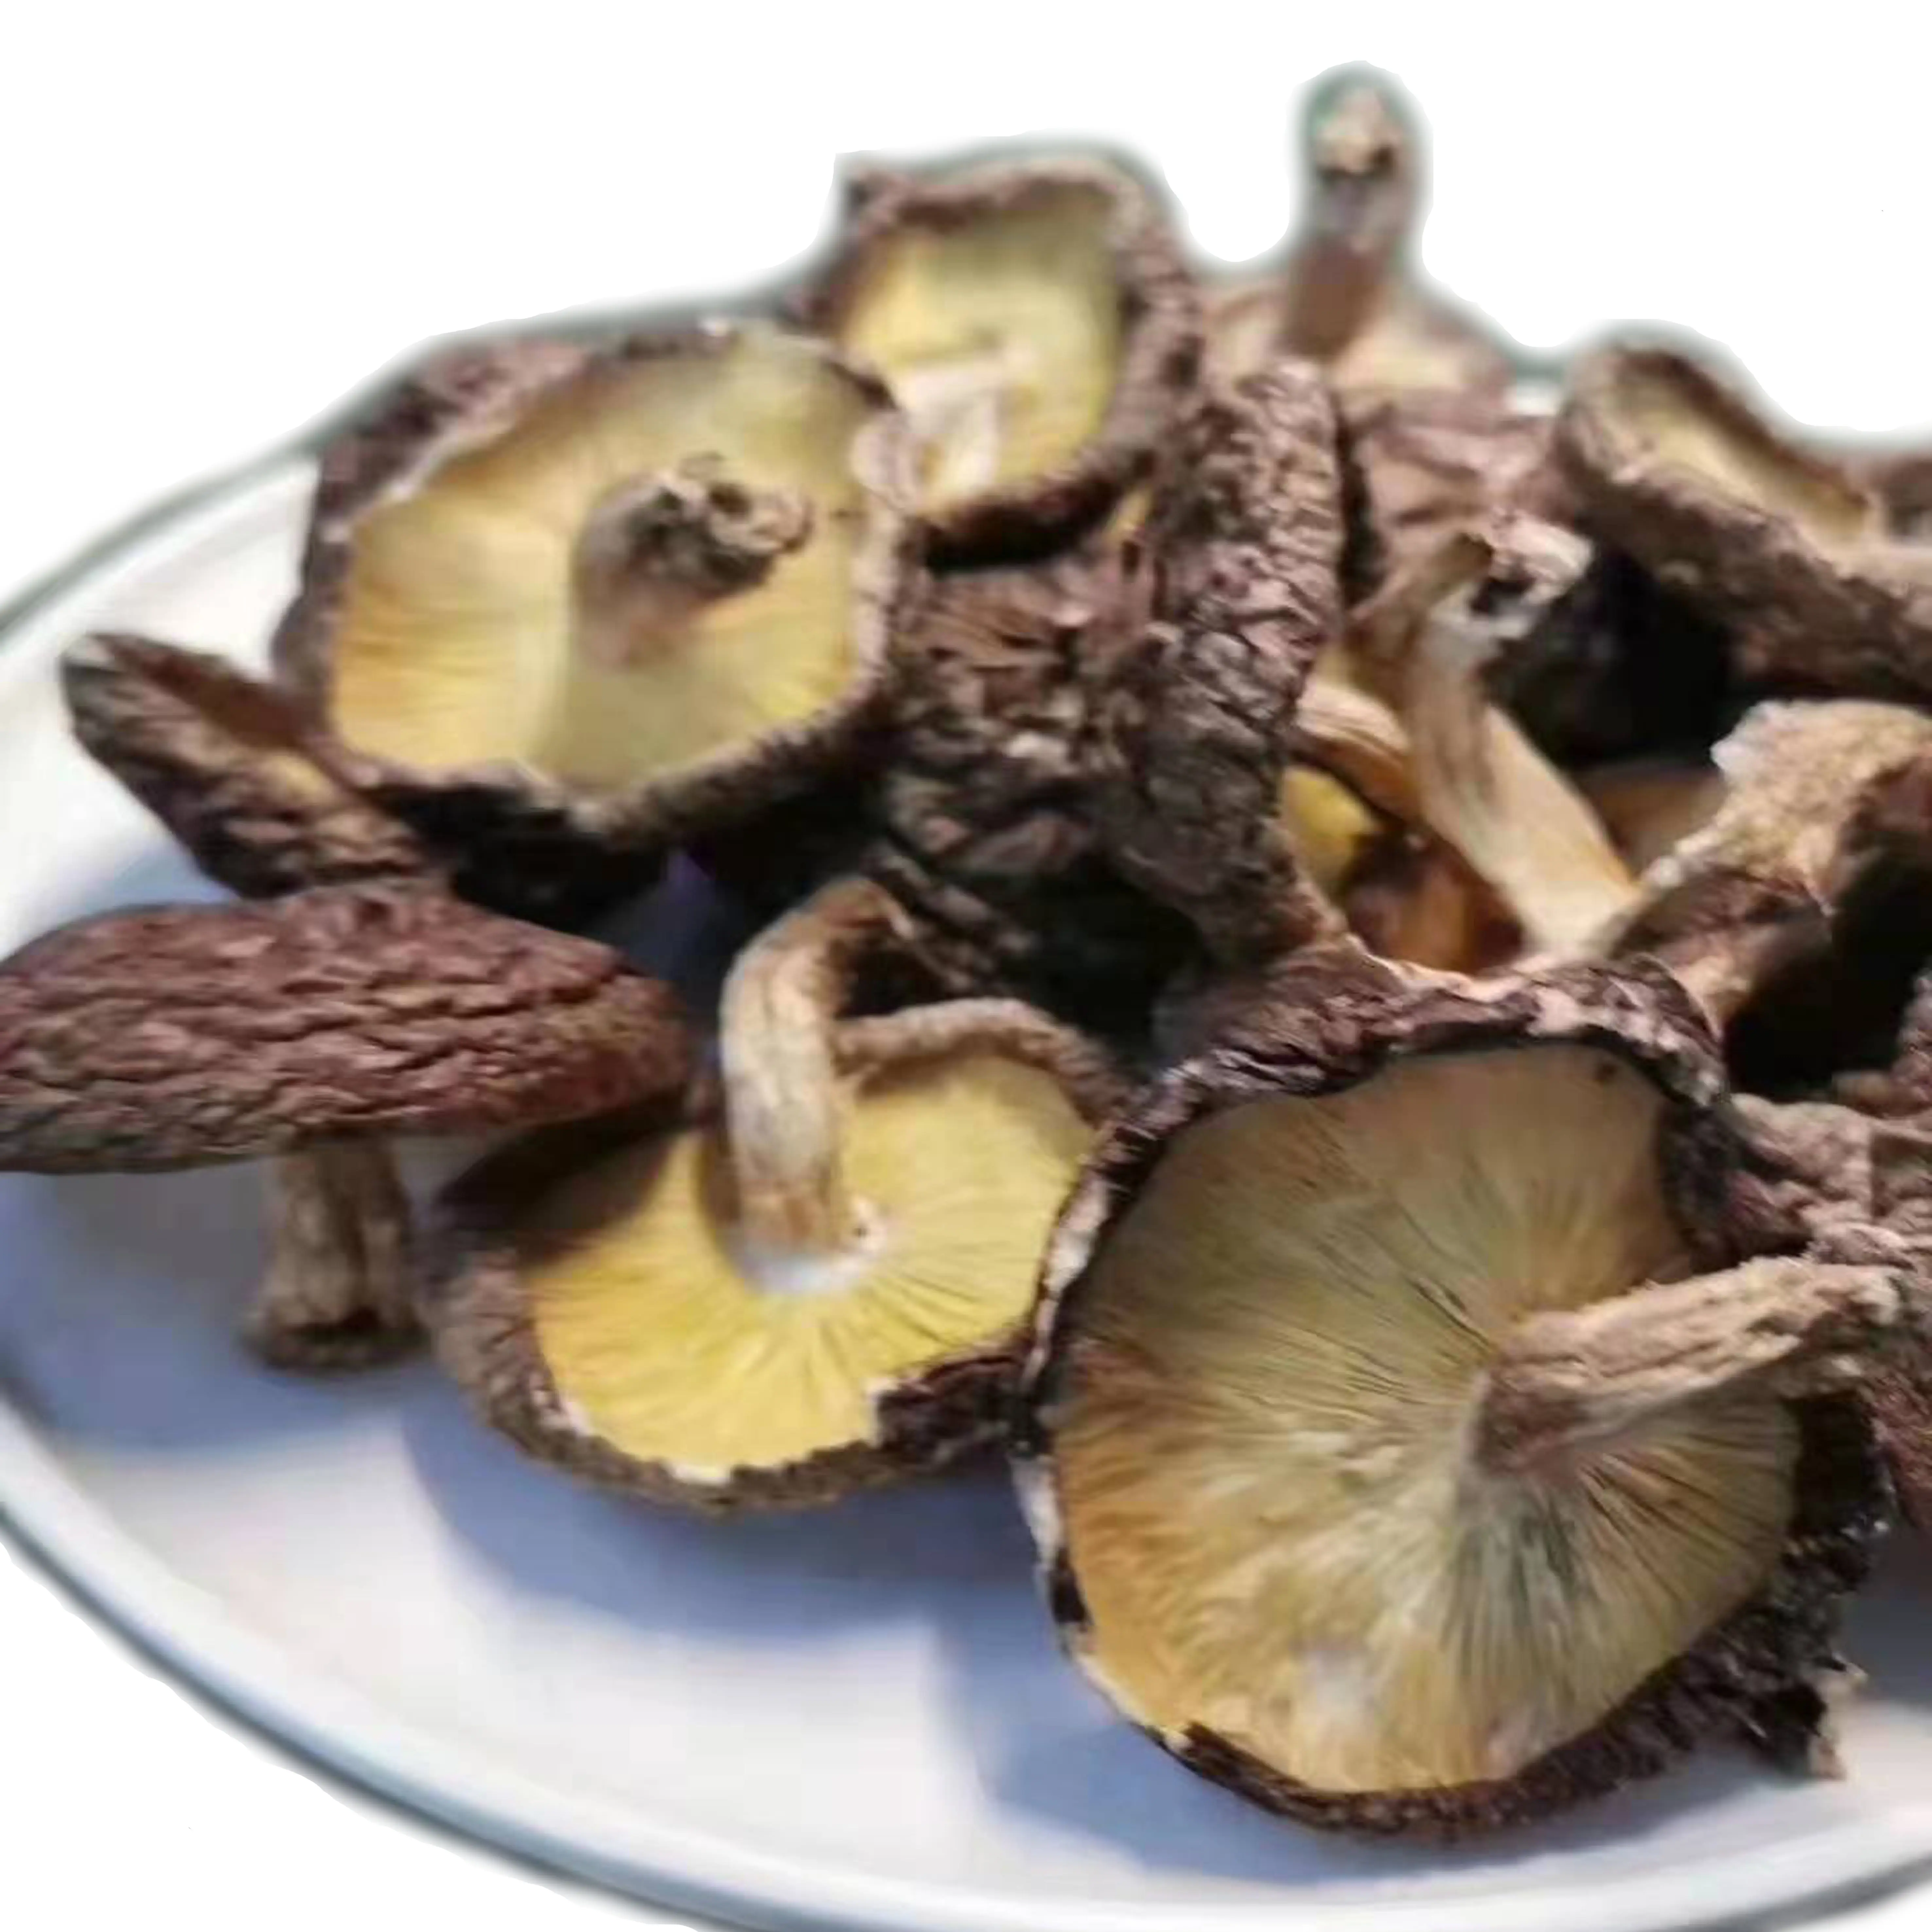 Popular Products Low Moq Dried Shiitake Mushroom At Good Prices Natural Delicious